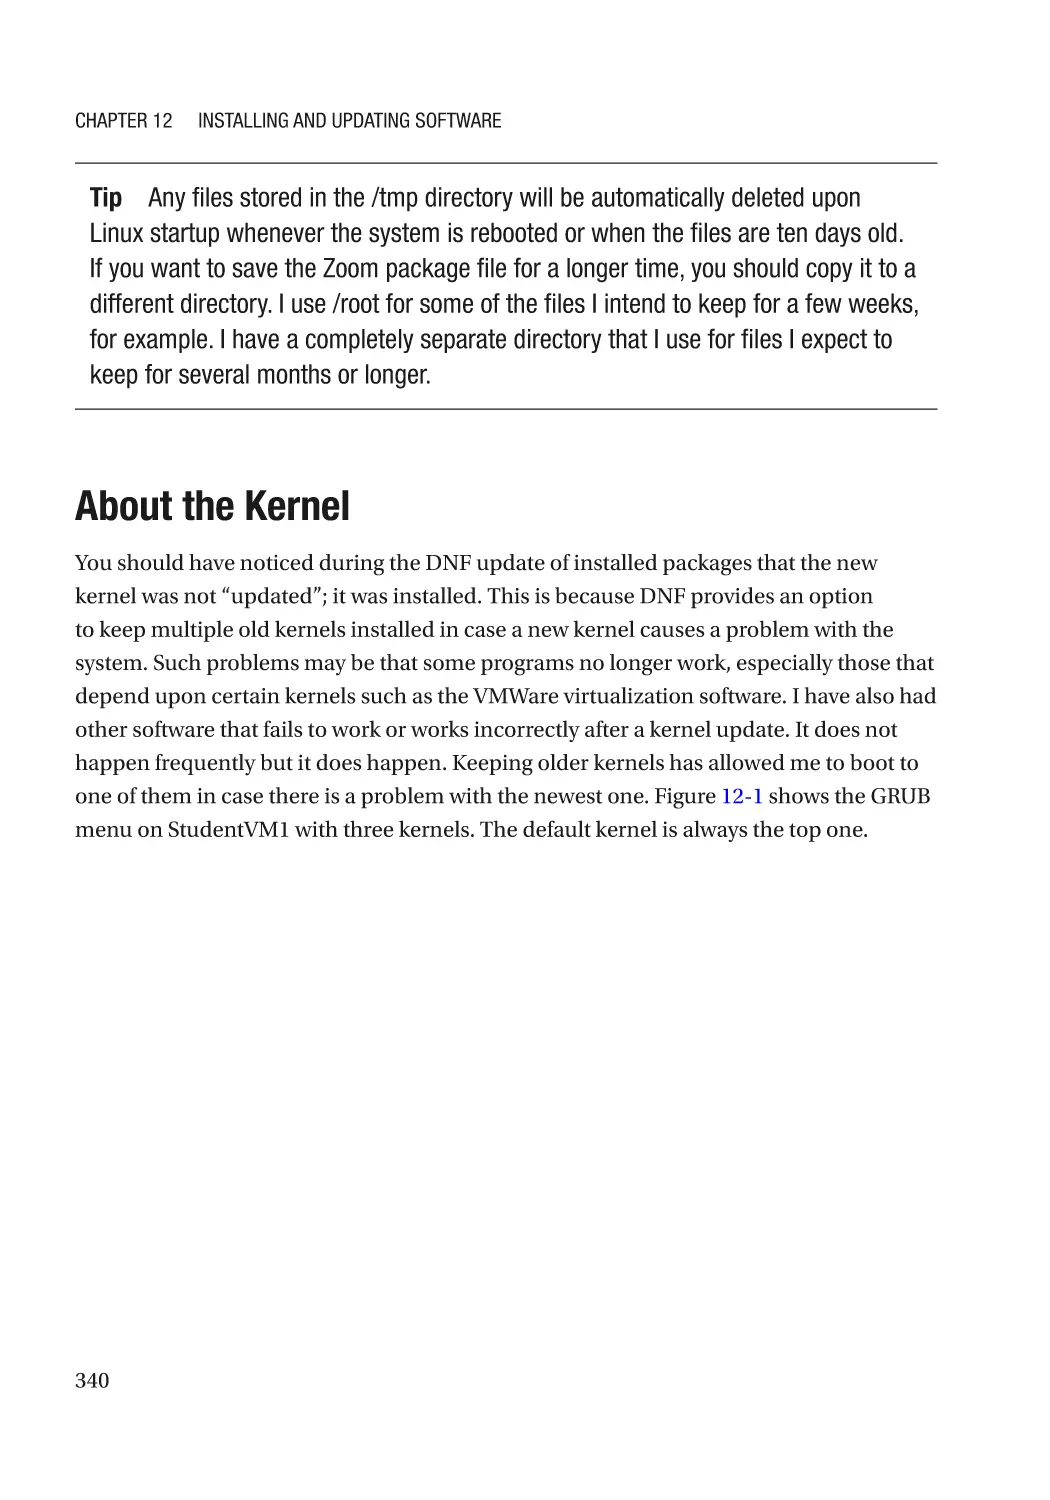 About the Kernel